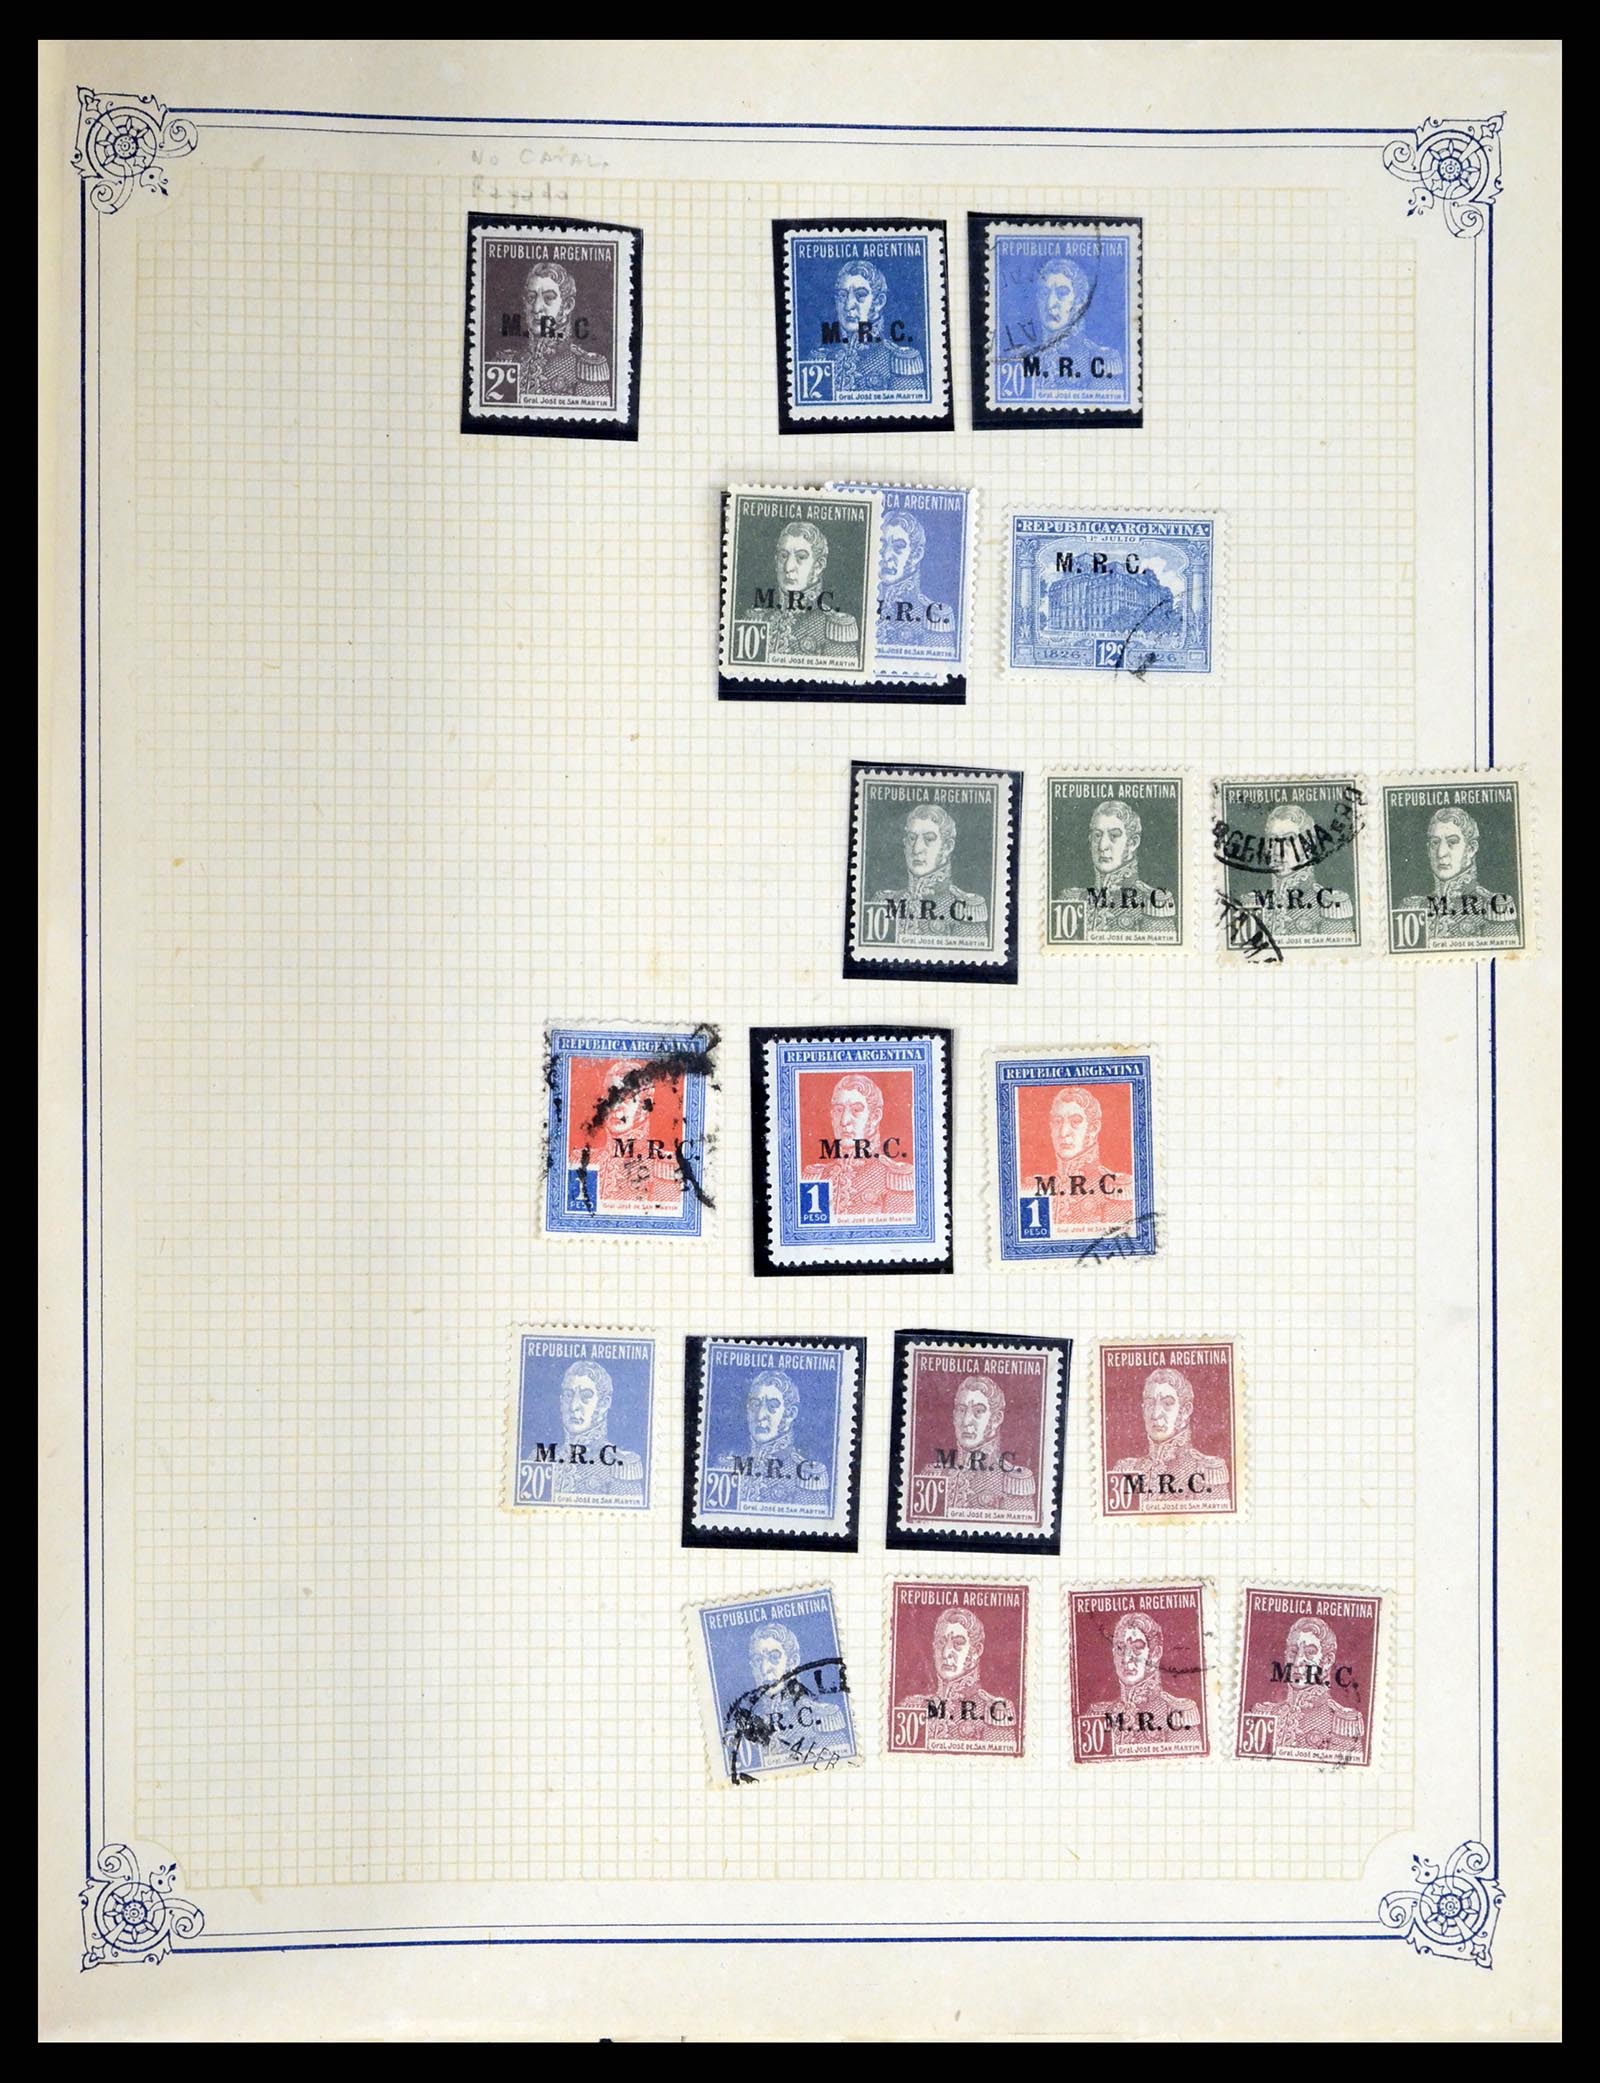 38162 0080 - Stamp collection 38162 Argentina service 1913-1931.